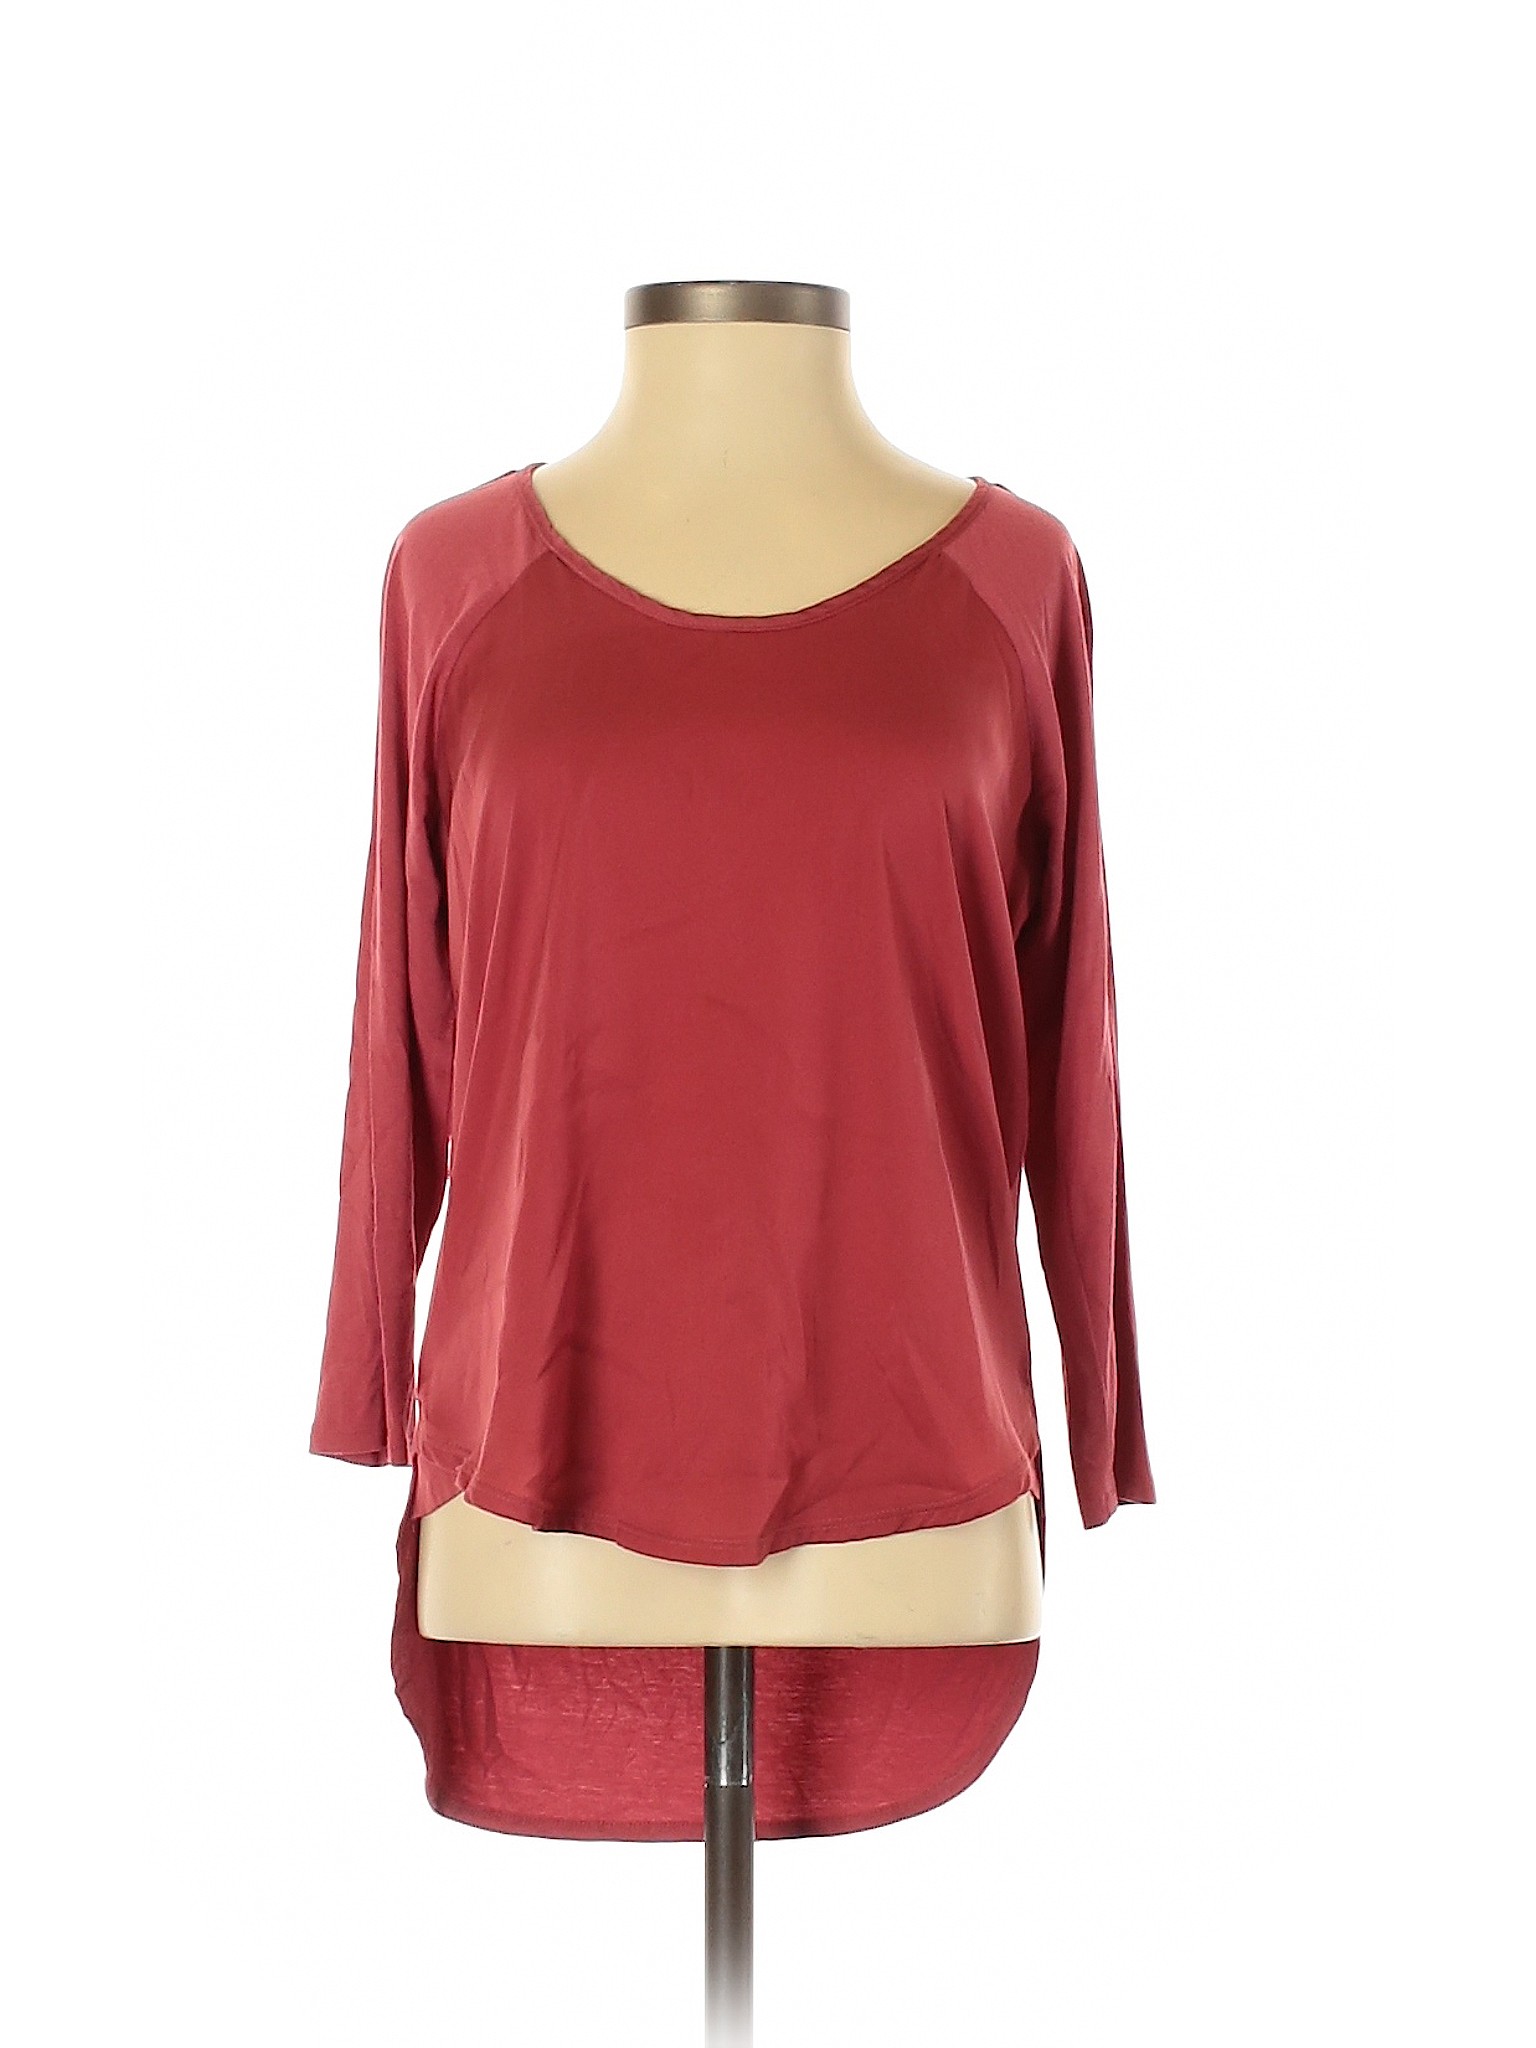 The Limited Women Red 3/4 Sleeve Top XS | eBay